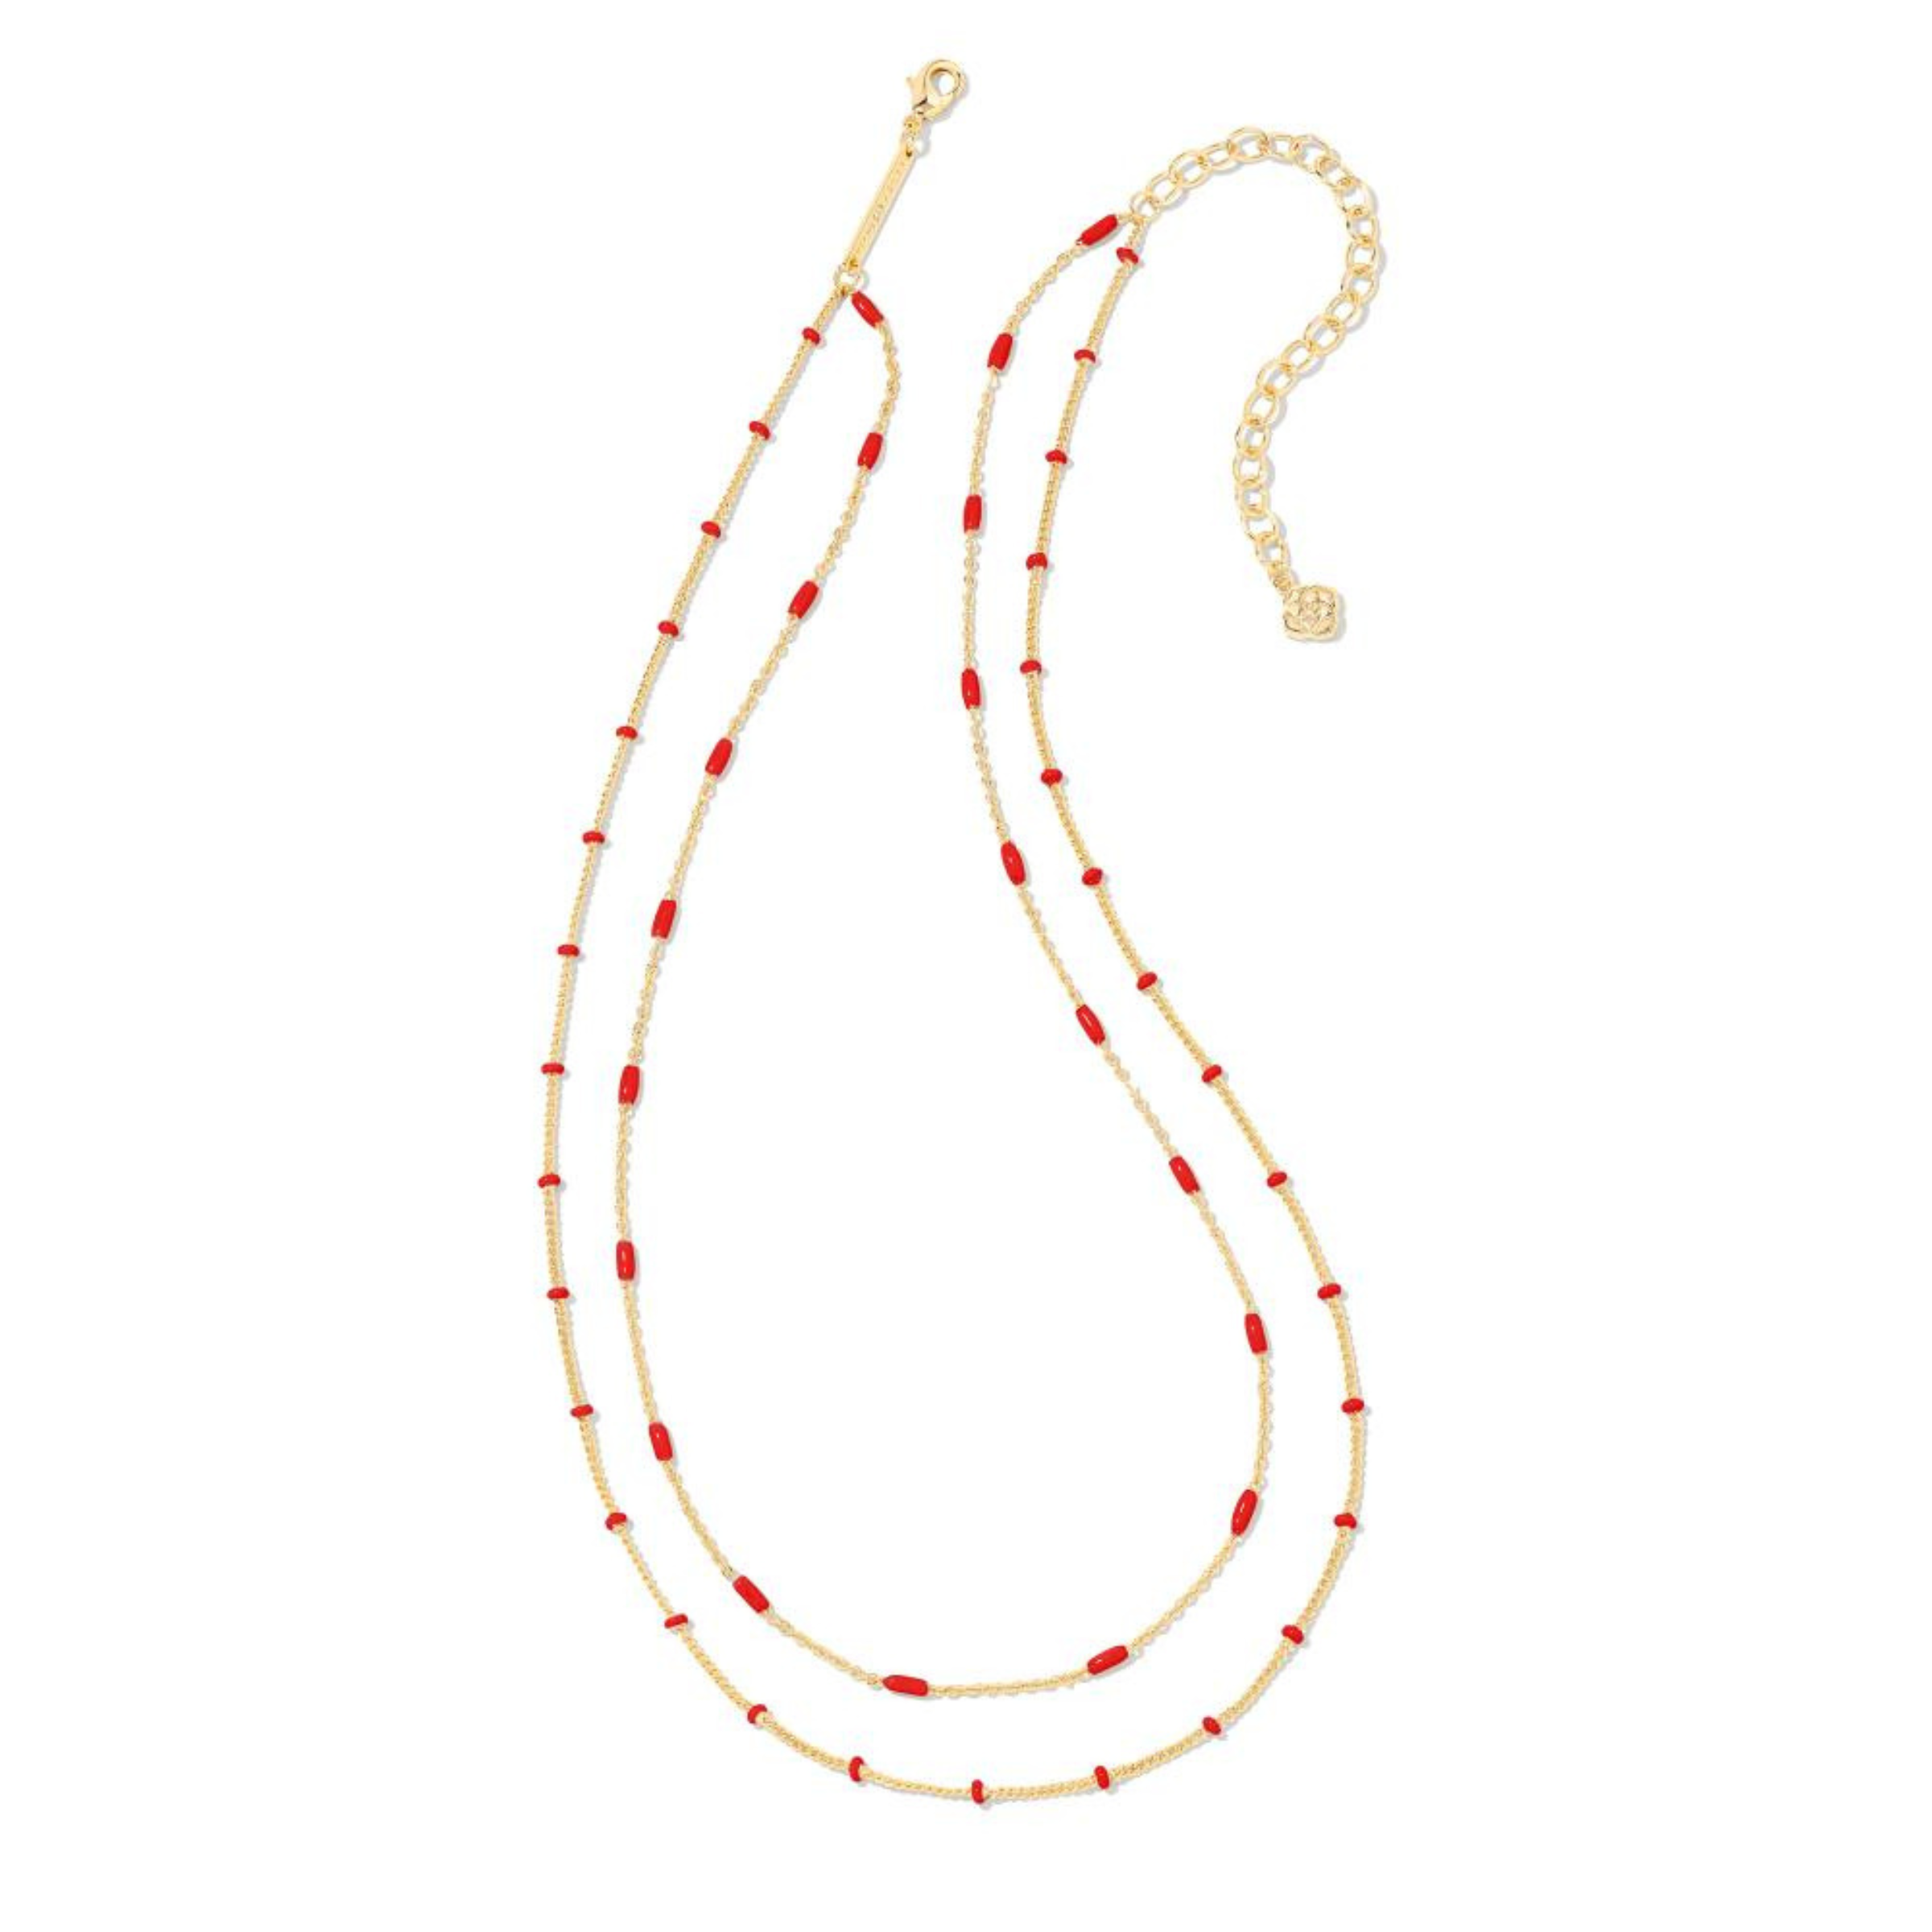 Two strand, adjustable chain necklace with red enamel spacers. This necklace is pictured on a white background. 